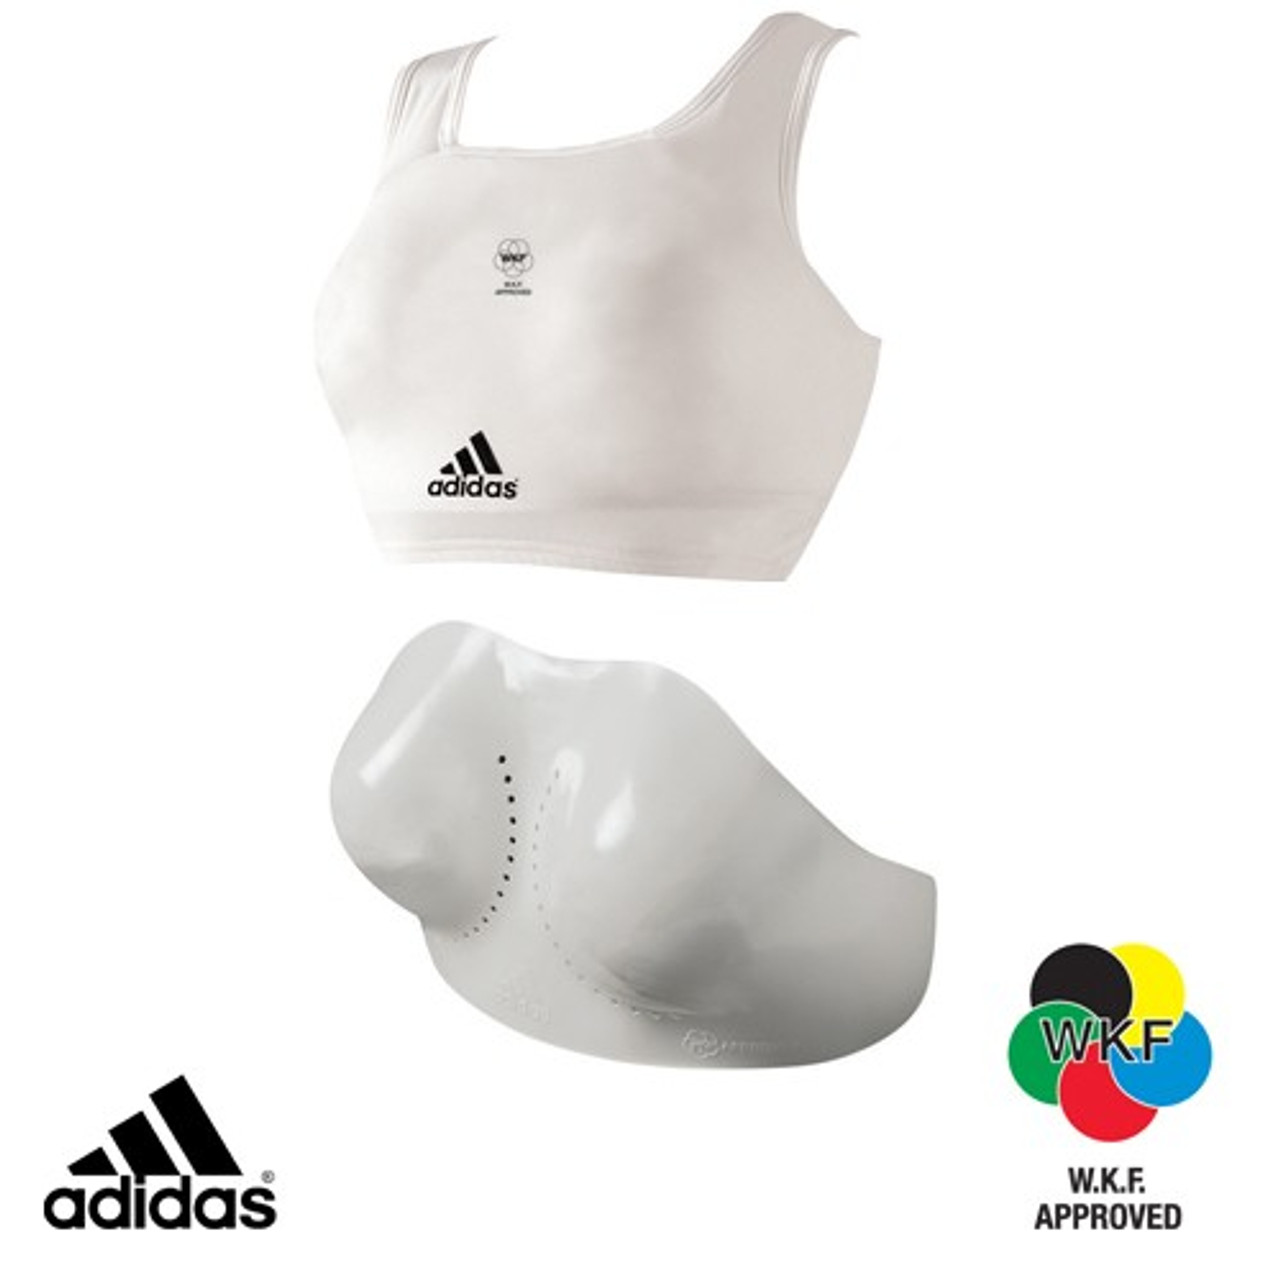 adidas karate chest protector